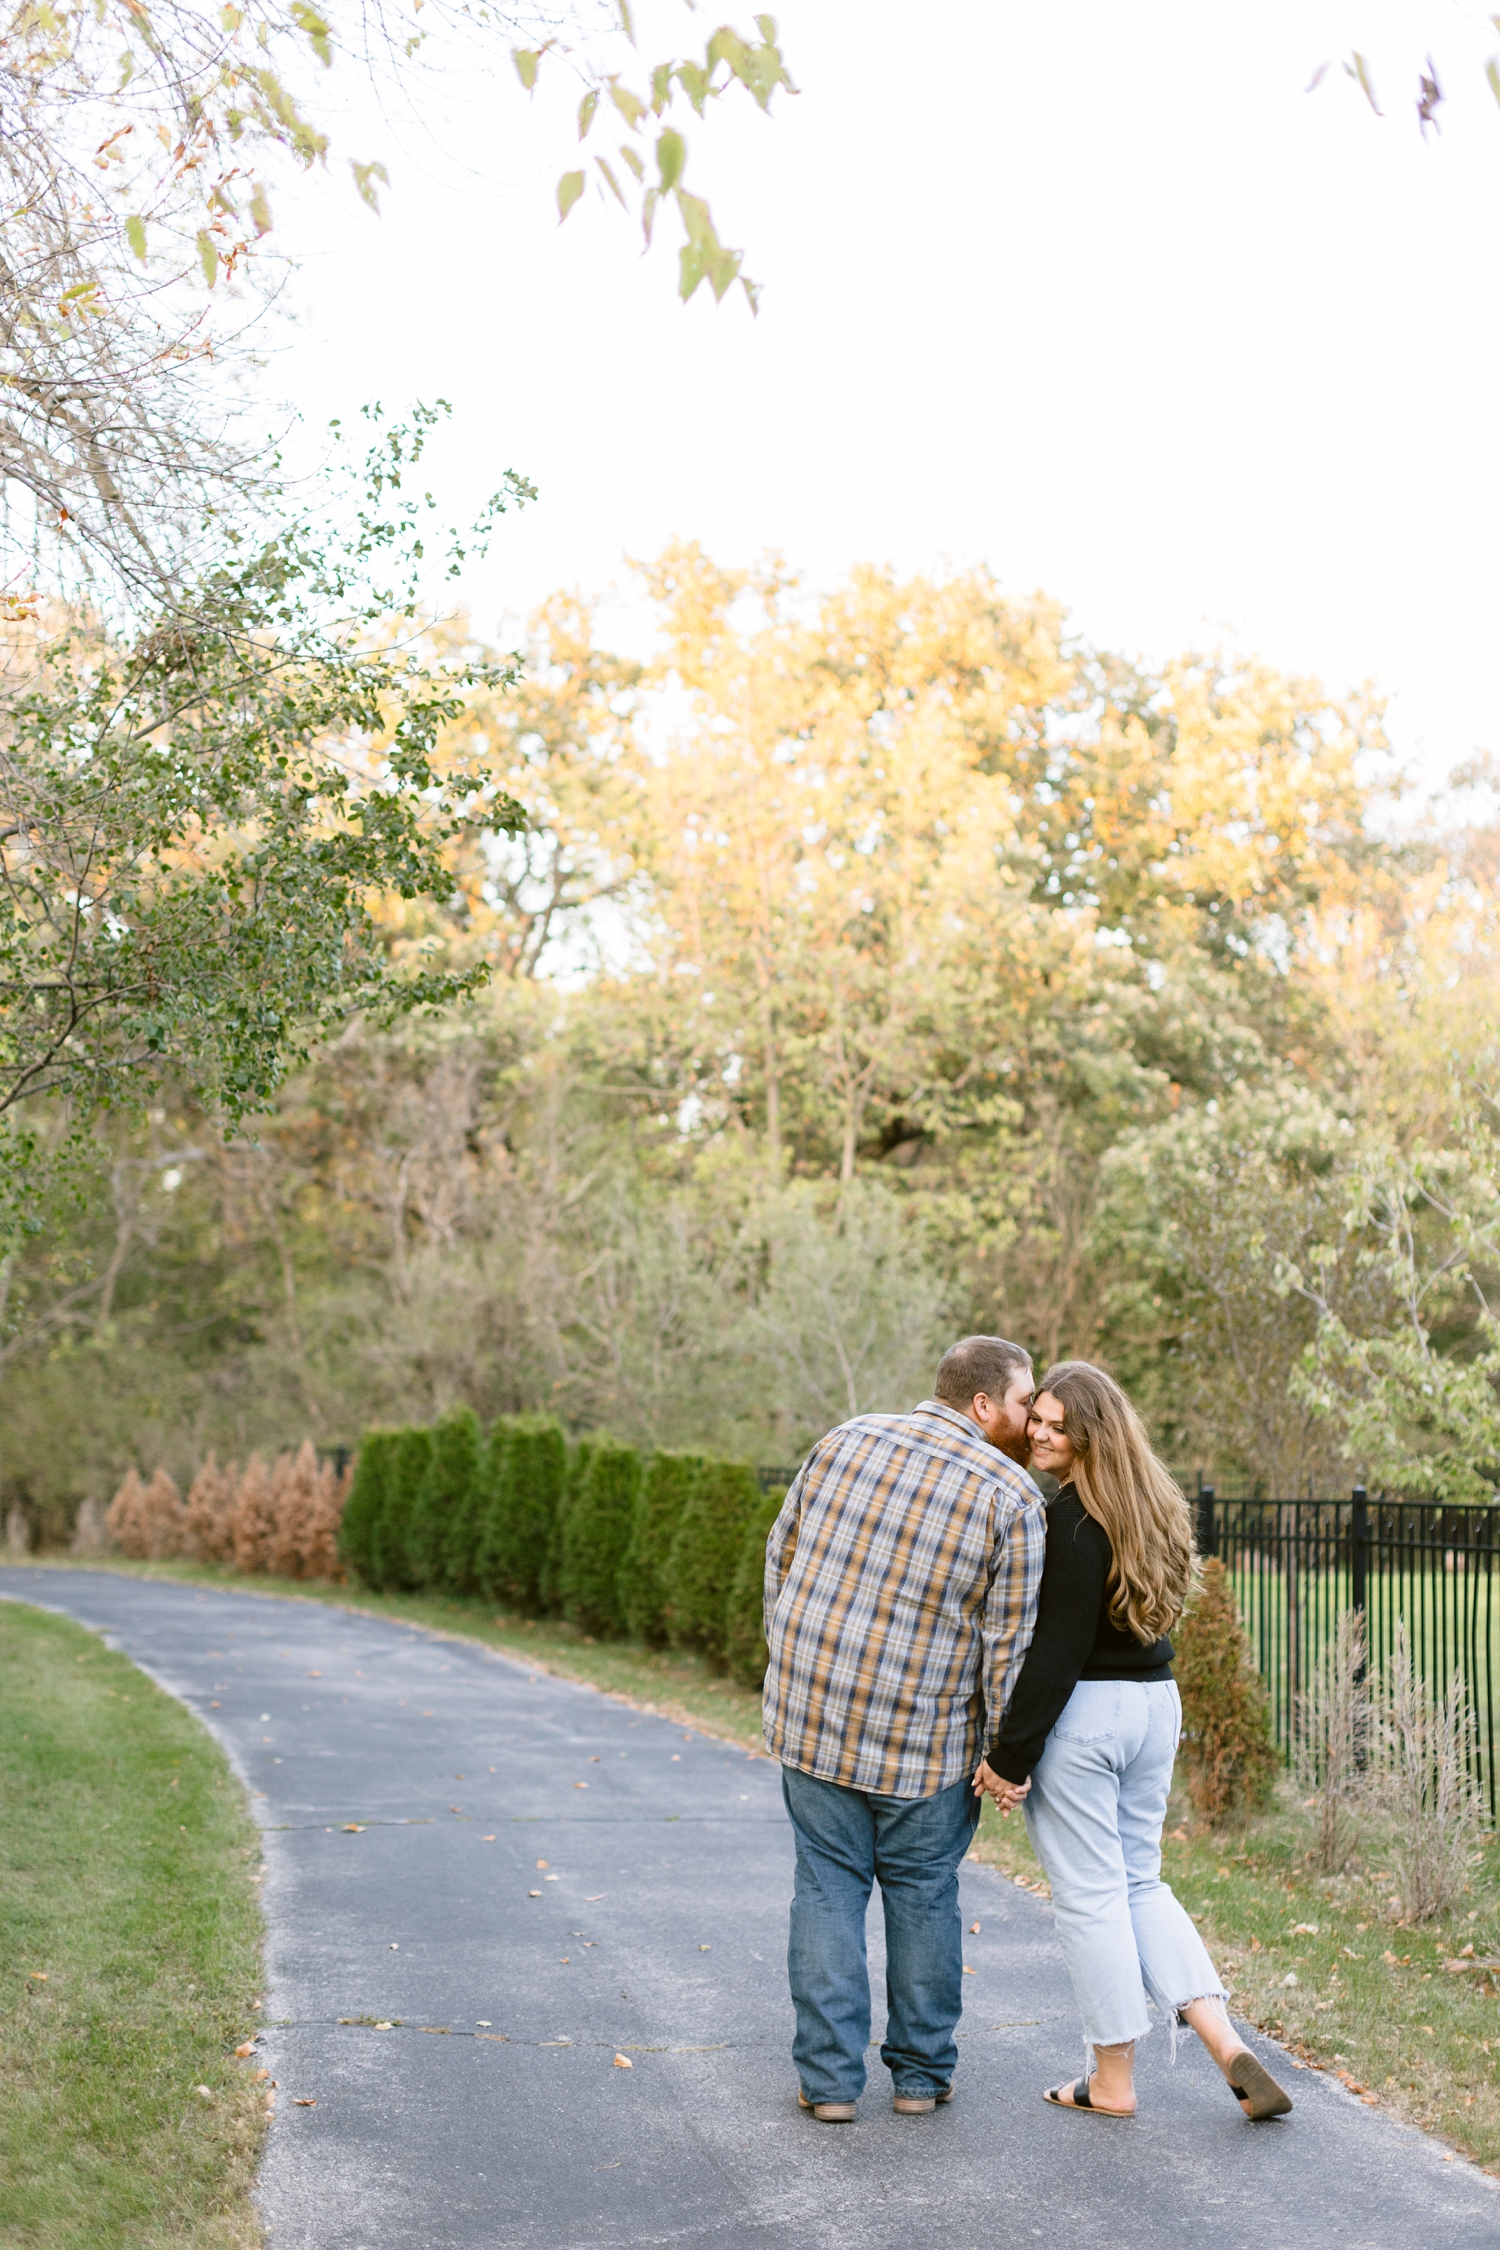 Trent kisses his bride-to-be on the cheek as they walk down the Cottonwood Trail in Humboldt, IA | CB Studio